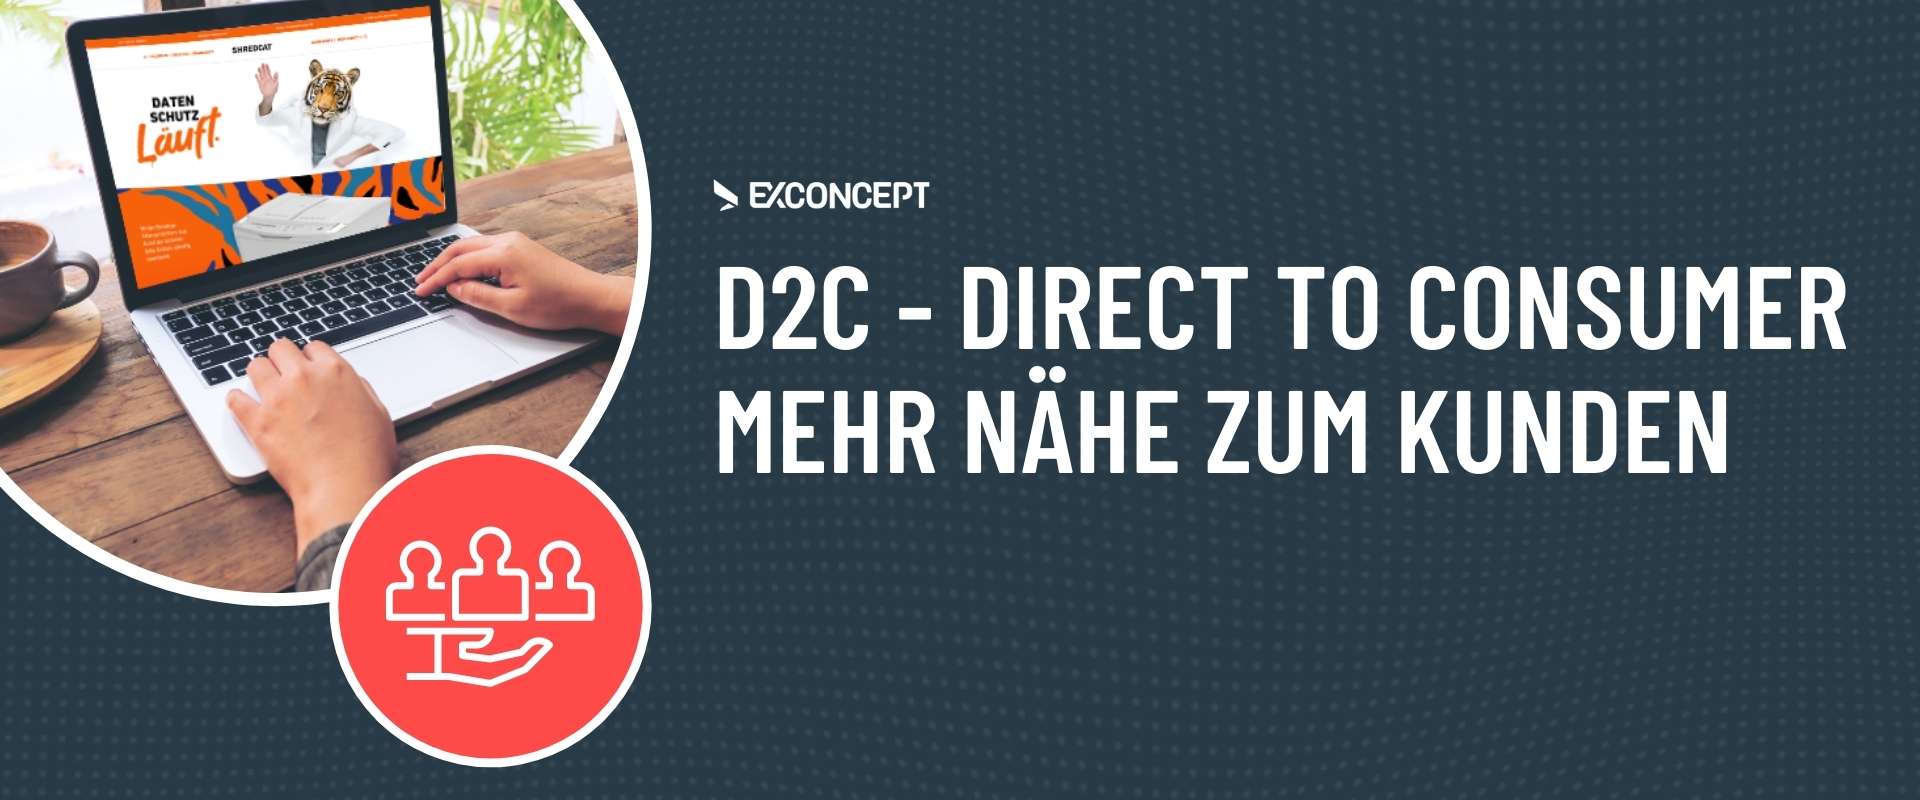 Direct to Consumer D2C Header